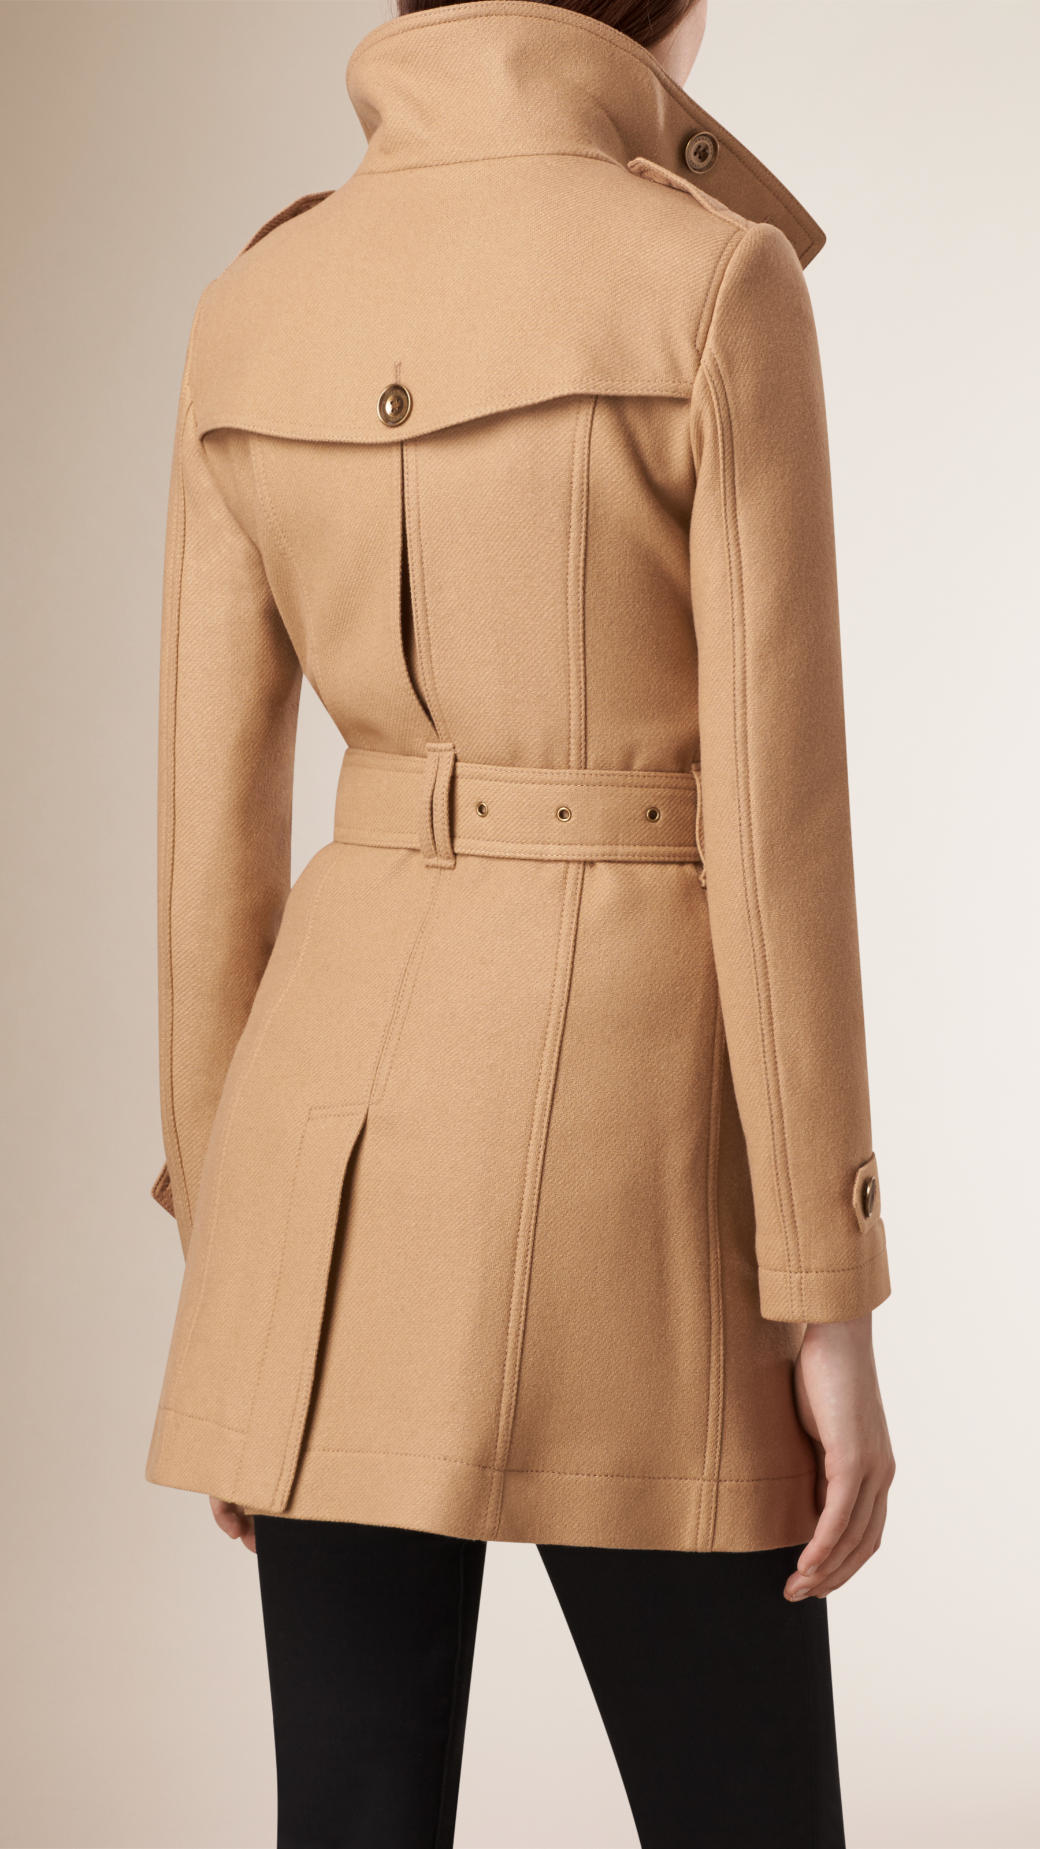 Lyst - Burberry Short Double Wool Twill Trench Coat in Brown